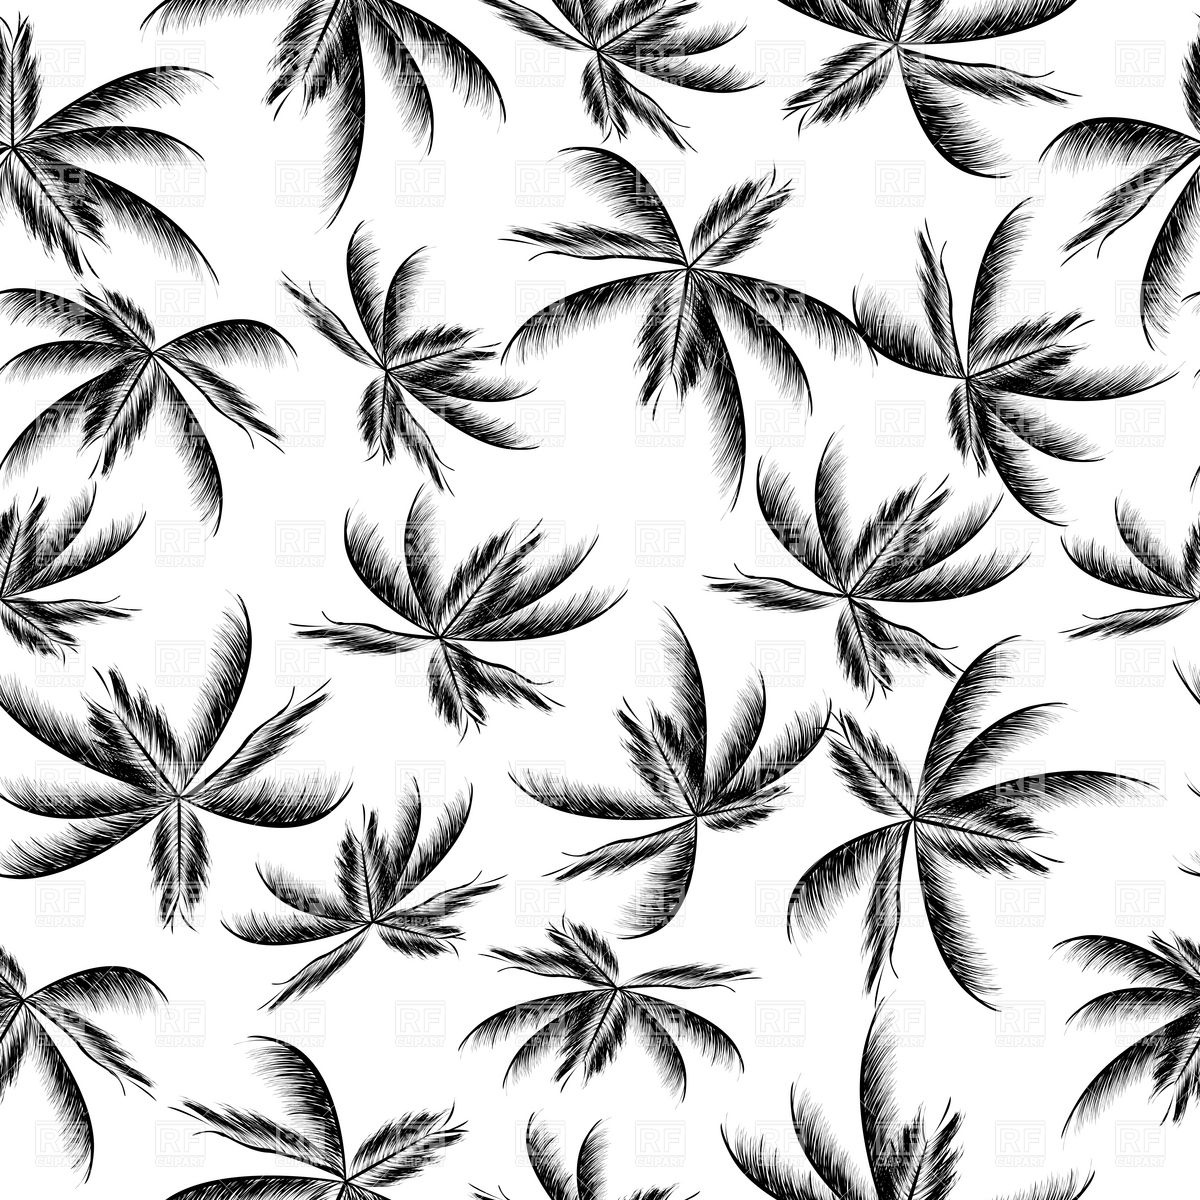 15 Photos of Palm Tree Free Vector Patterns